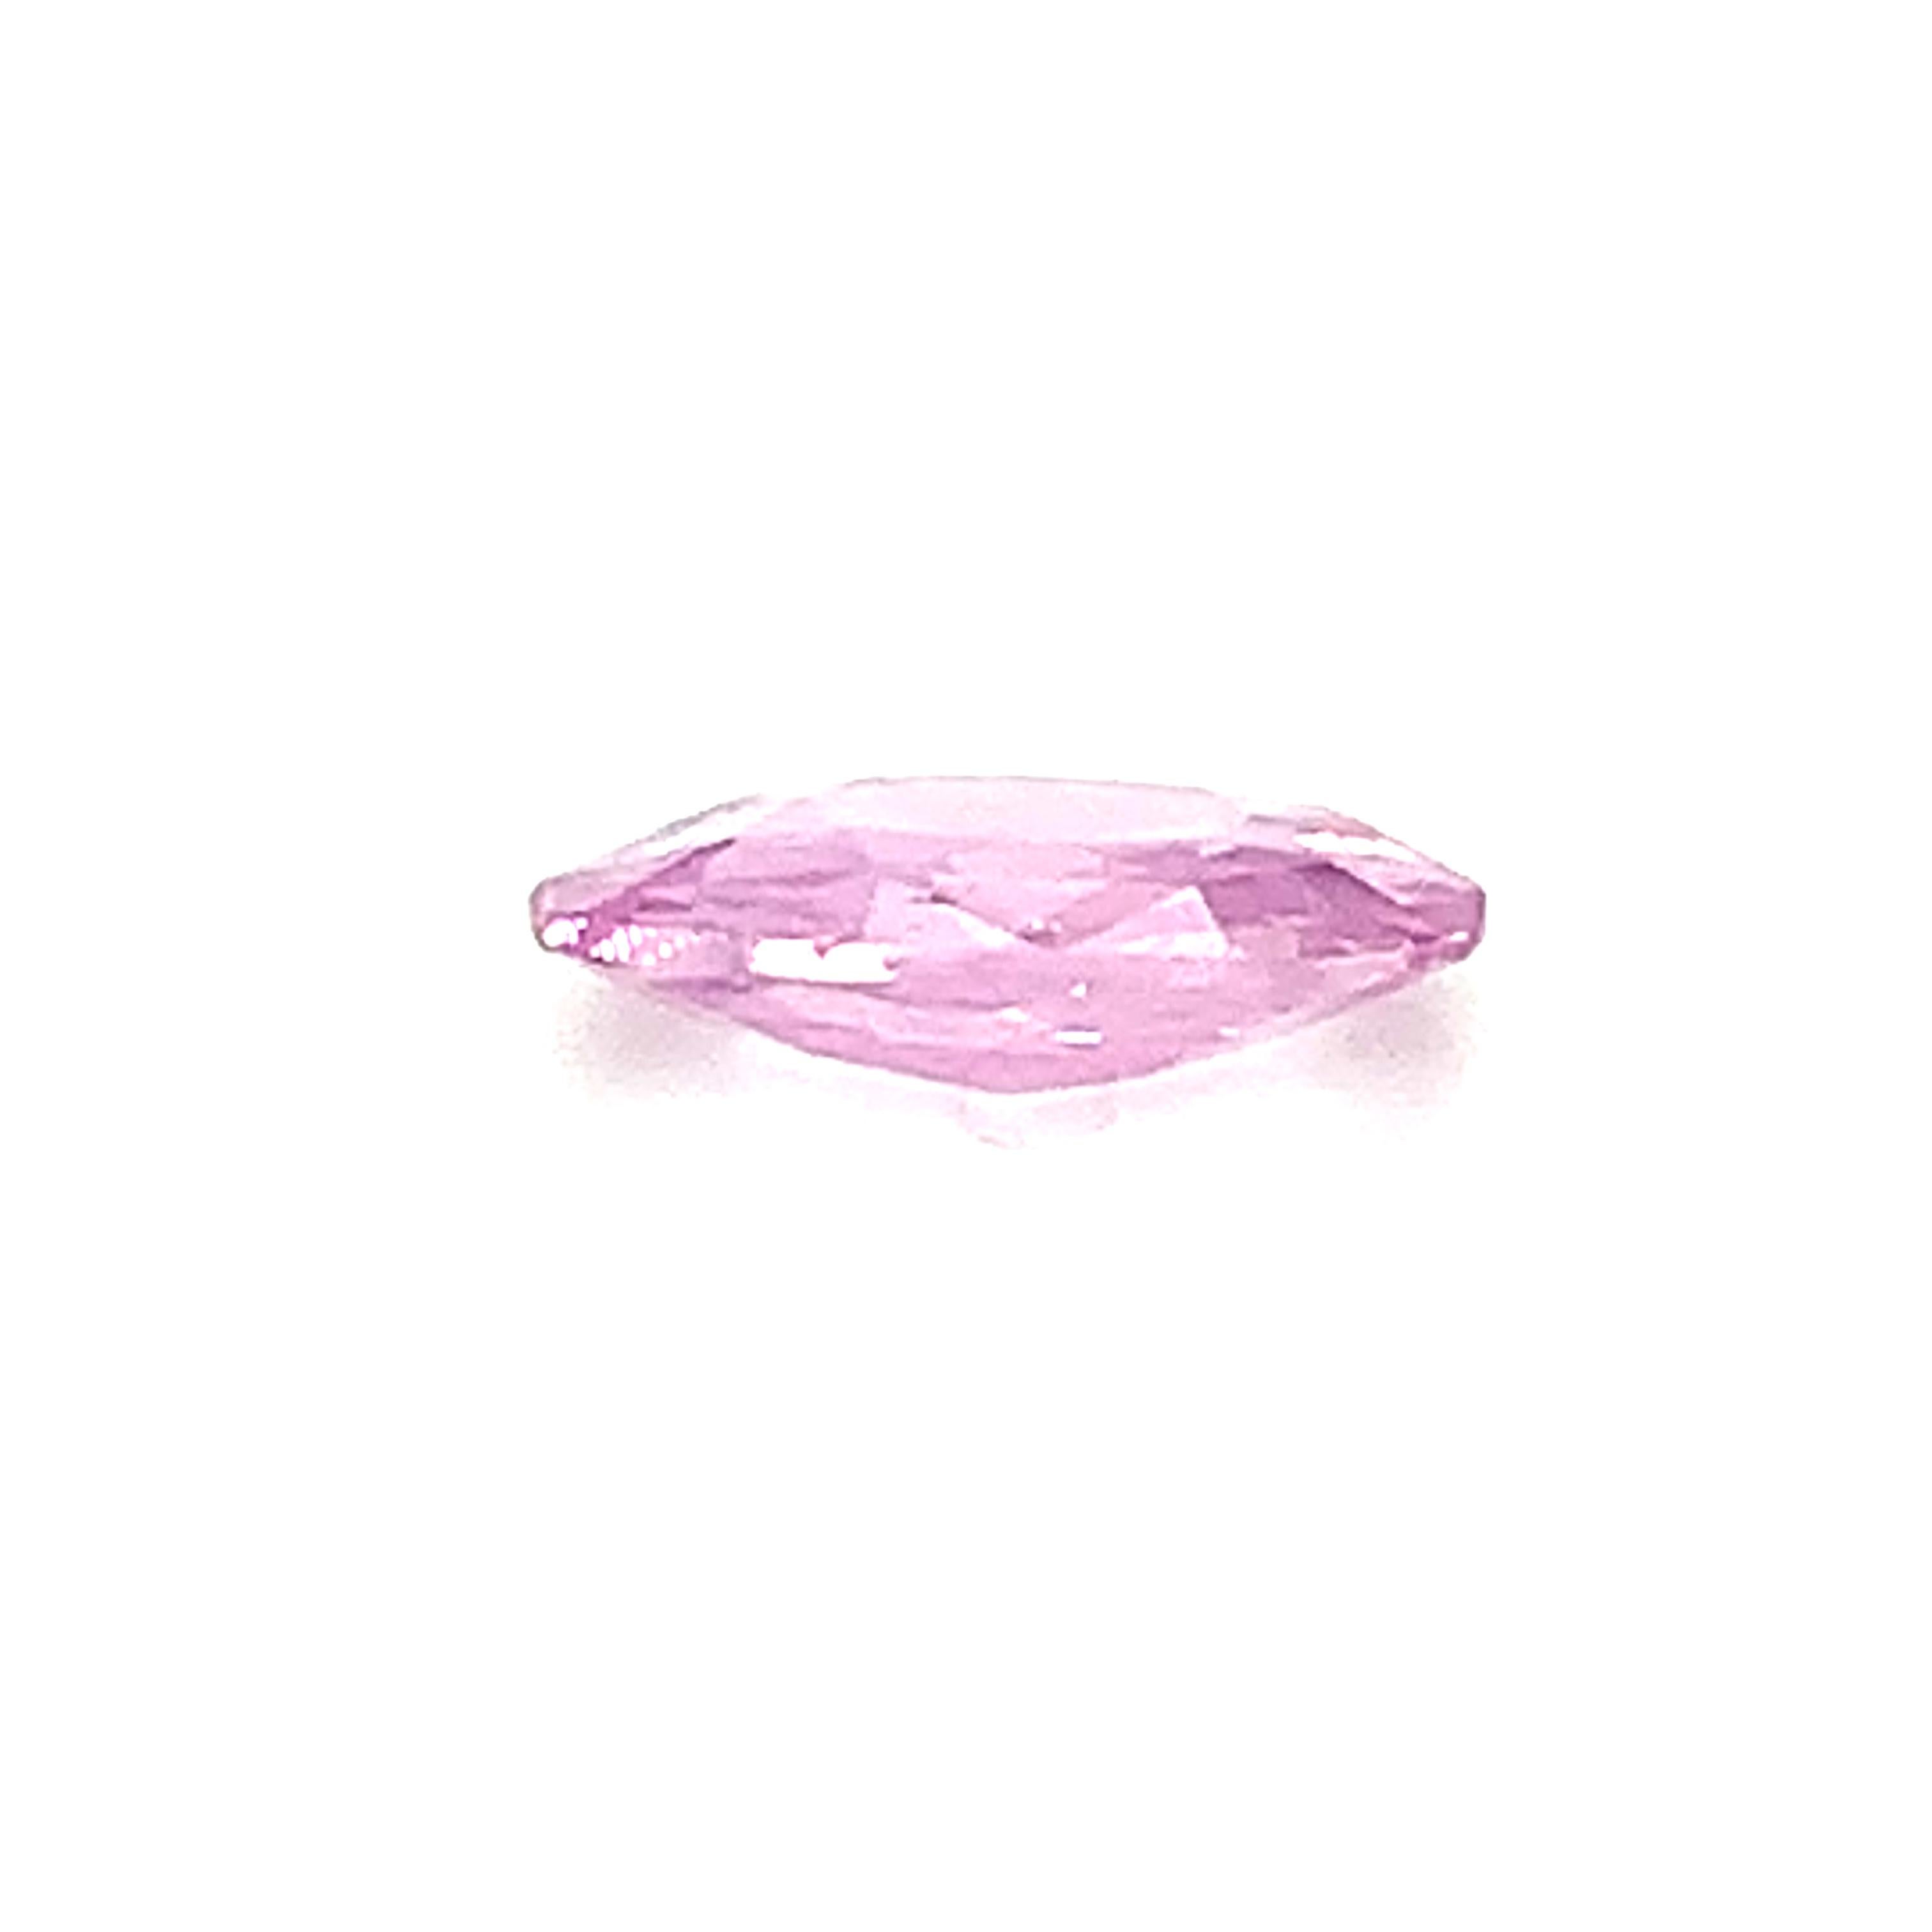 Women's or Men's 2.95 Ct. Pink Sapphire Oval GIA, Unset 3-Stone Engagement Ring or Pendant Gem